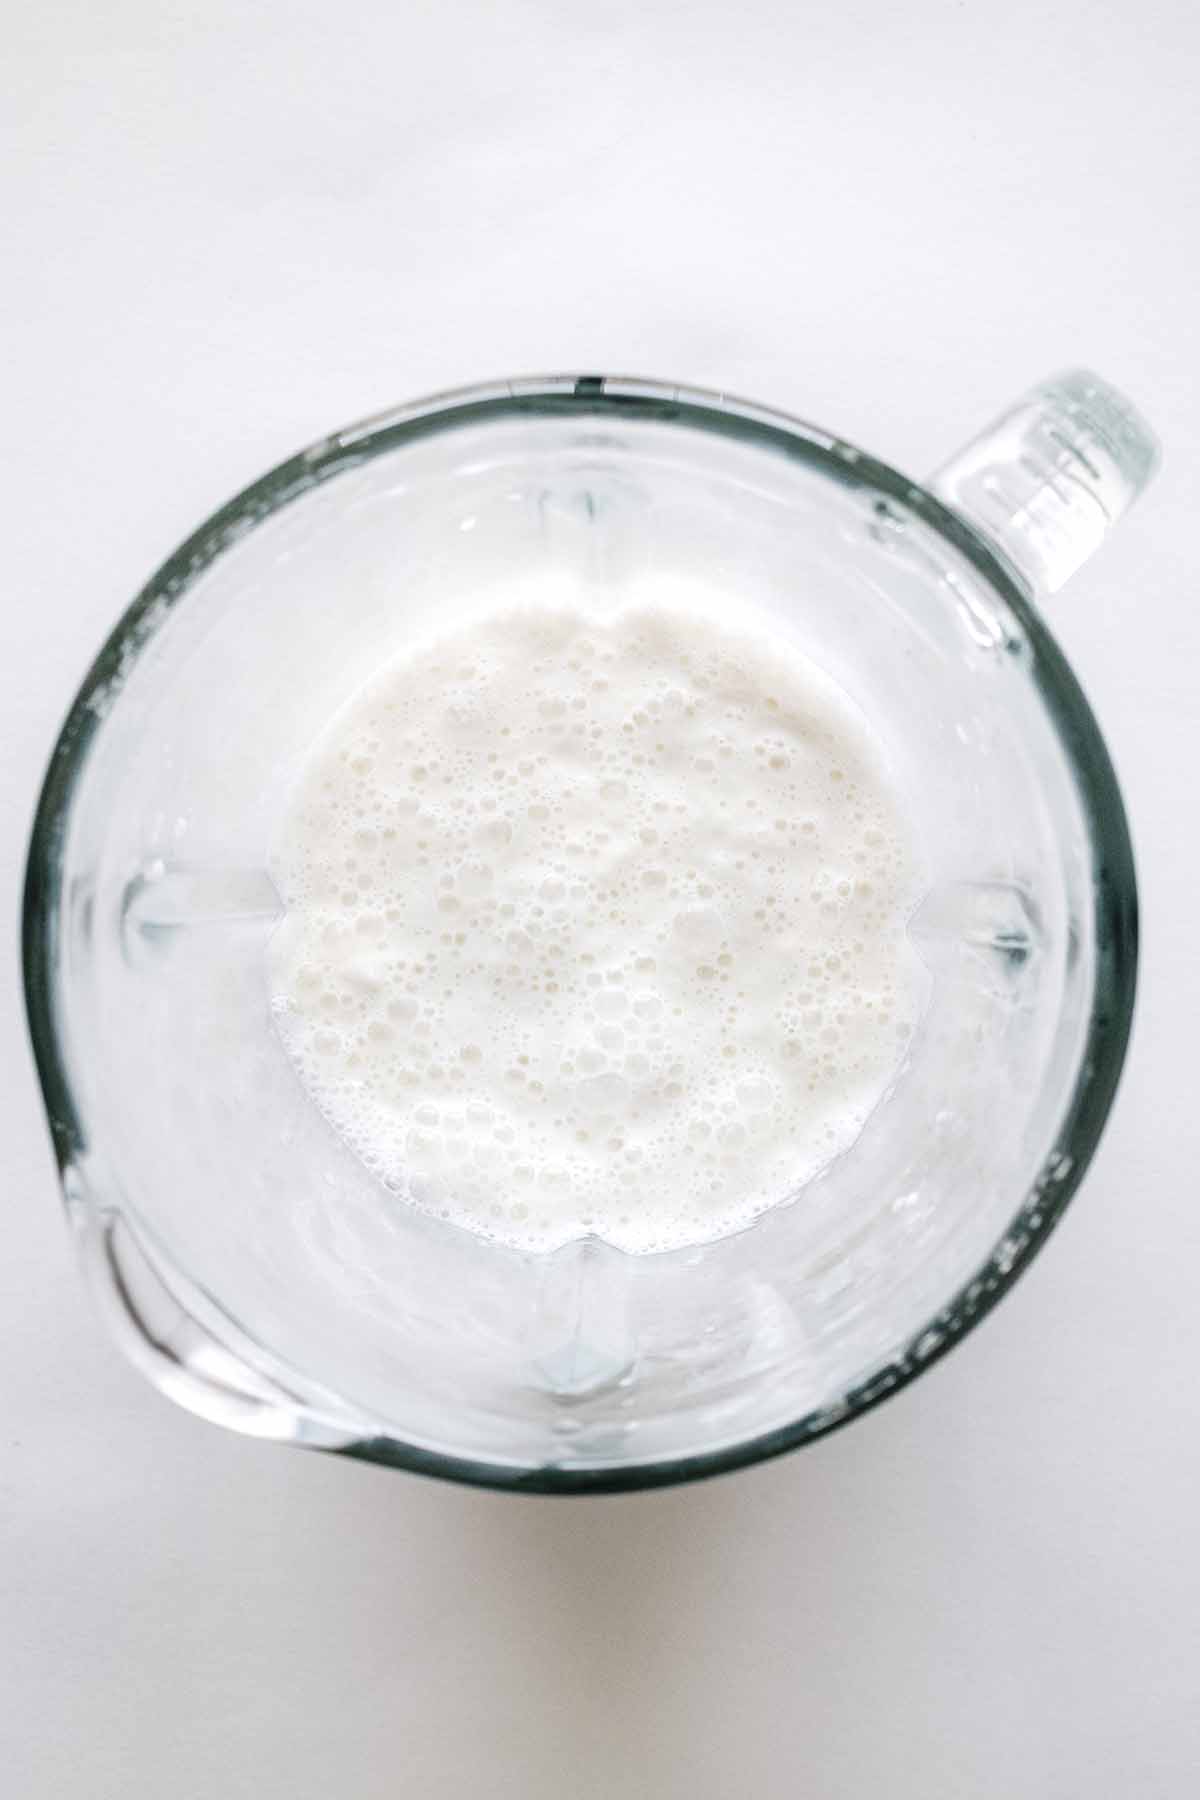 Overhead view of all ingredients blended and frothy